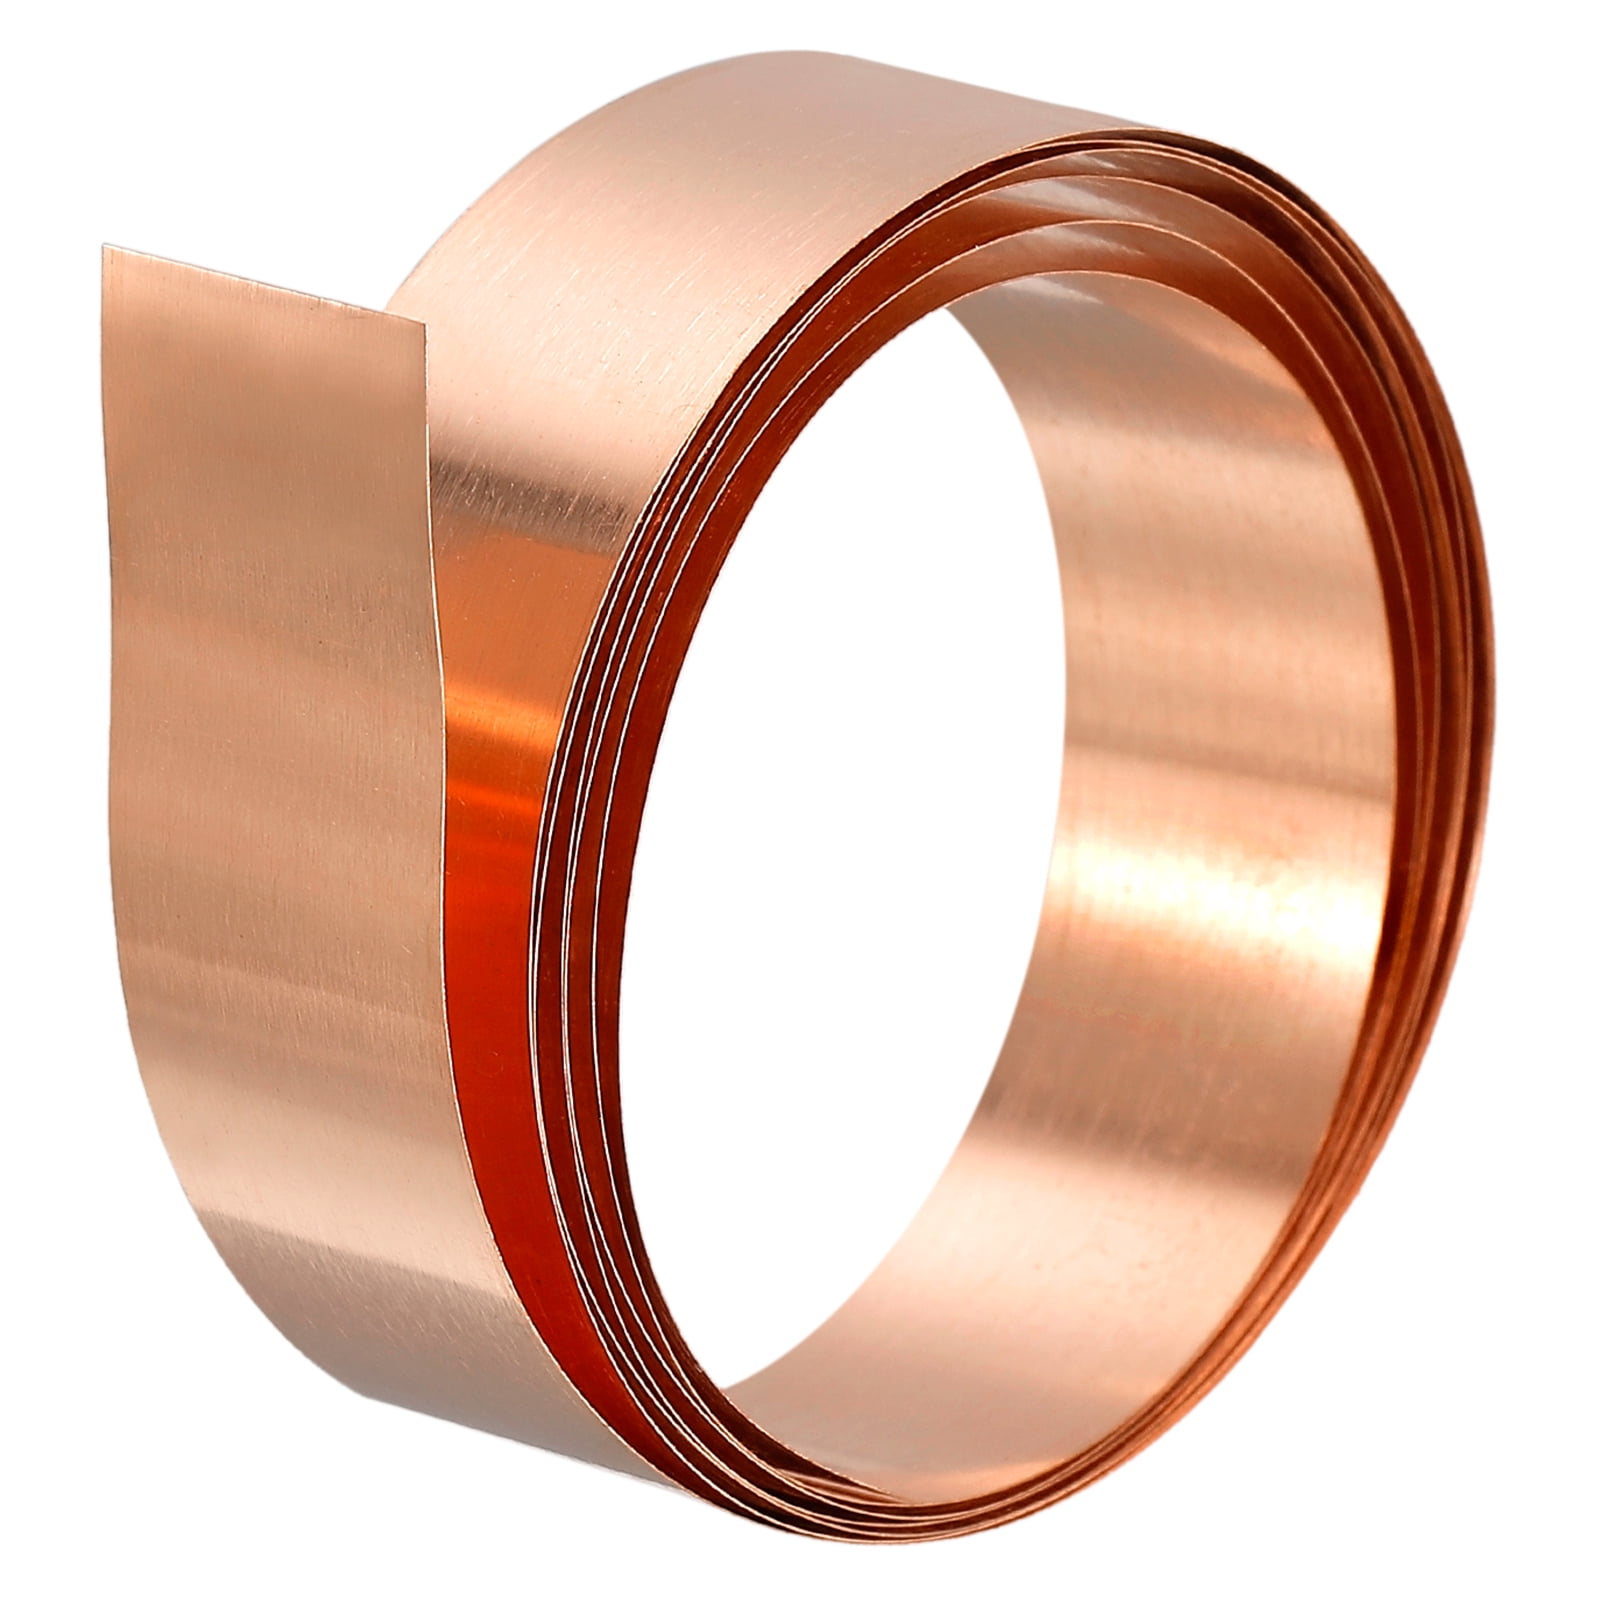 Copper Thin Metal Strips 9x 1/2 16oz Copper aprox 24 Gauge 9x.5 Pack of 5 